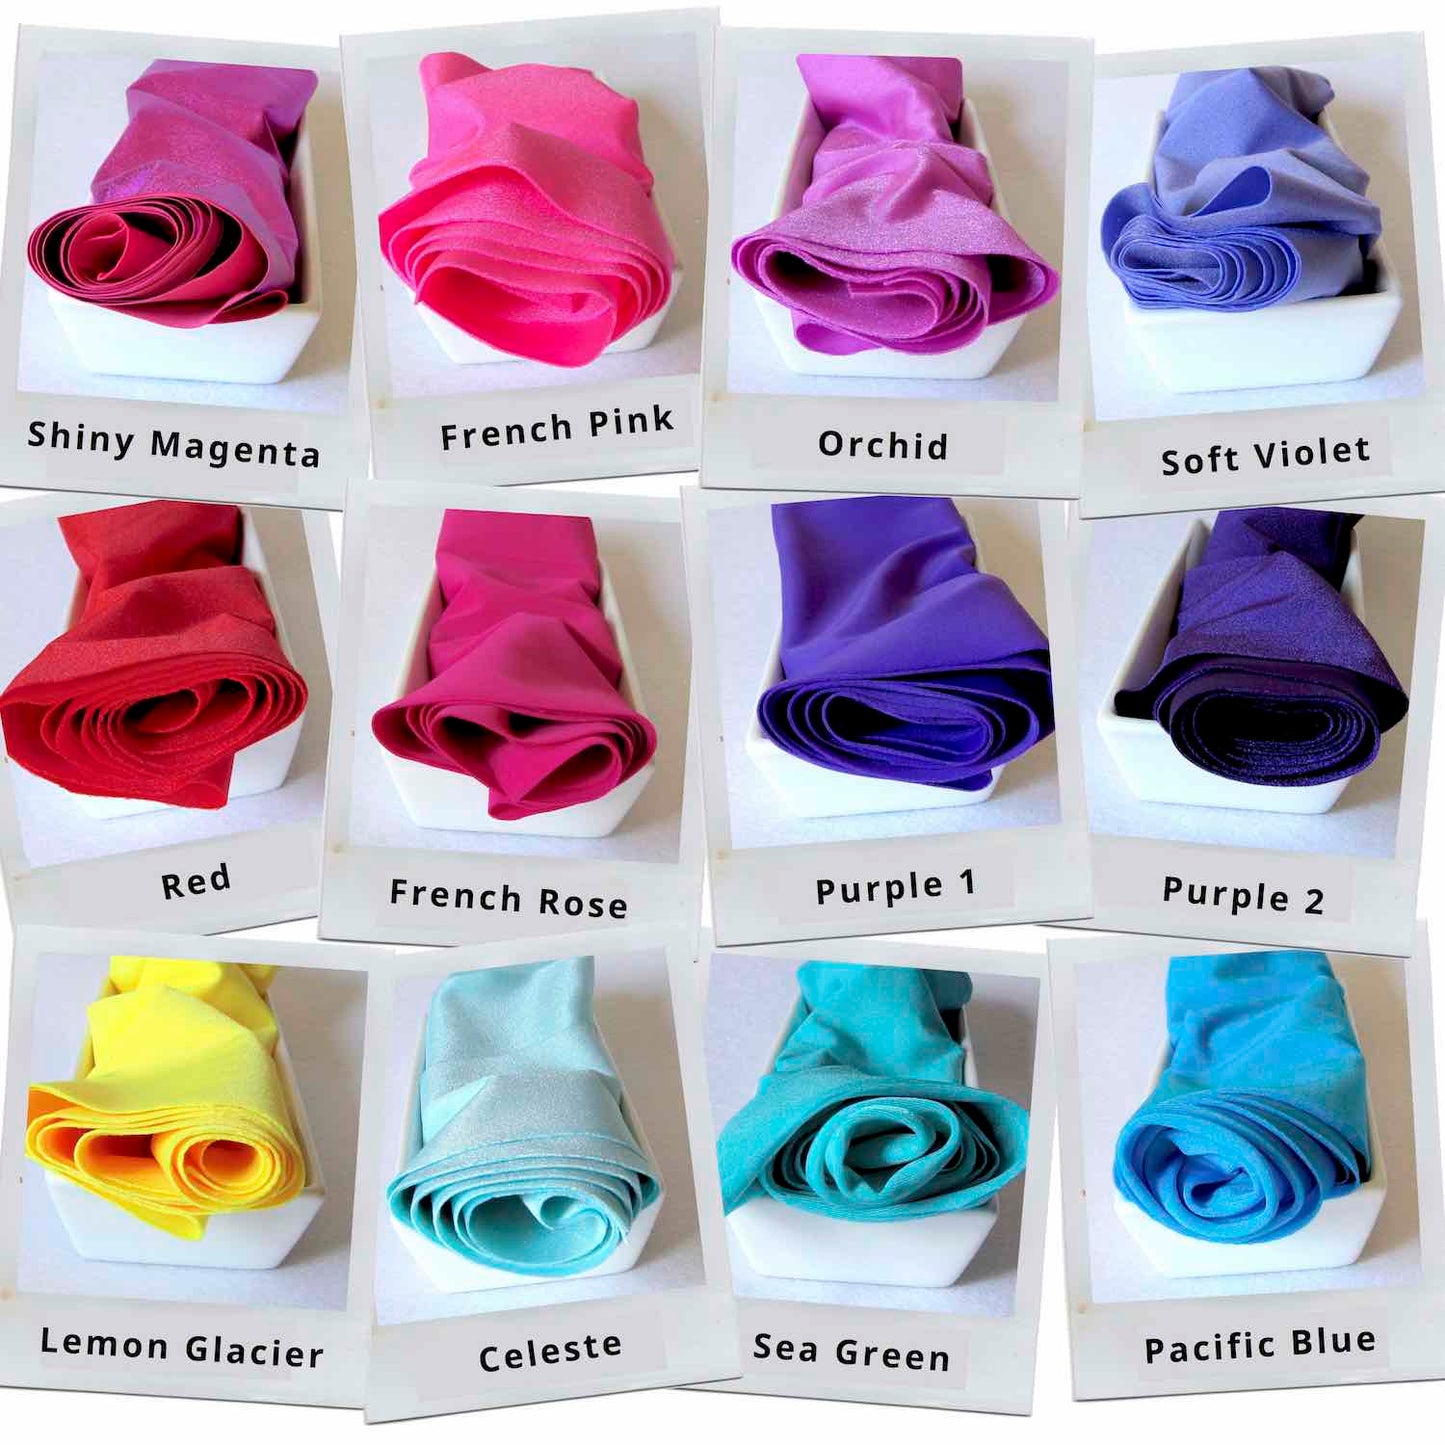 Fabric selection for soft and stylish limited edition Posh Me Fab boa scarves. Showing fabric colors of version Pixie Power.